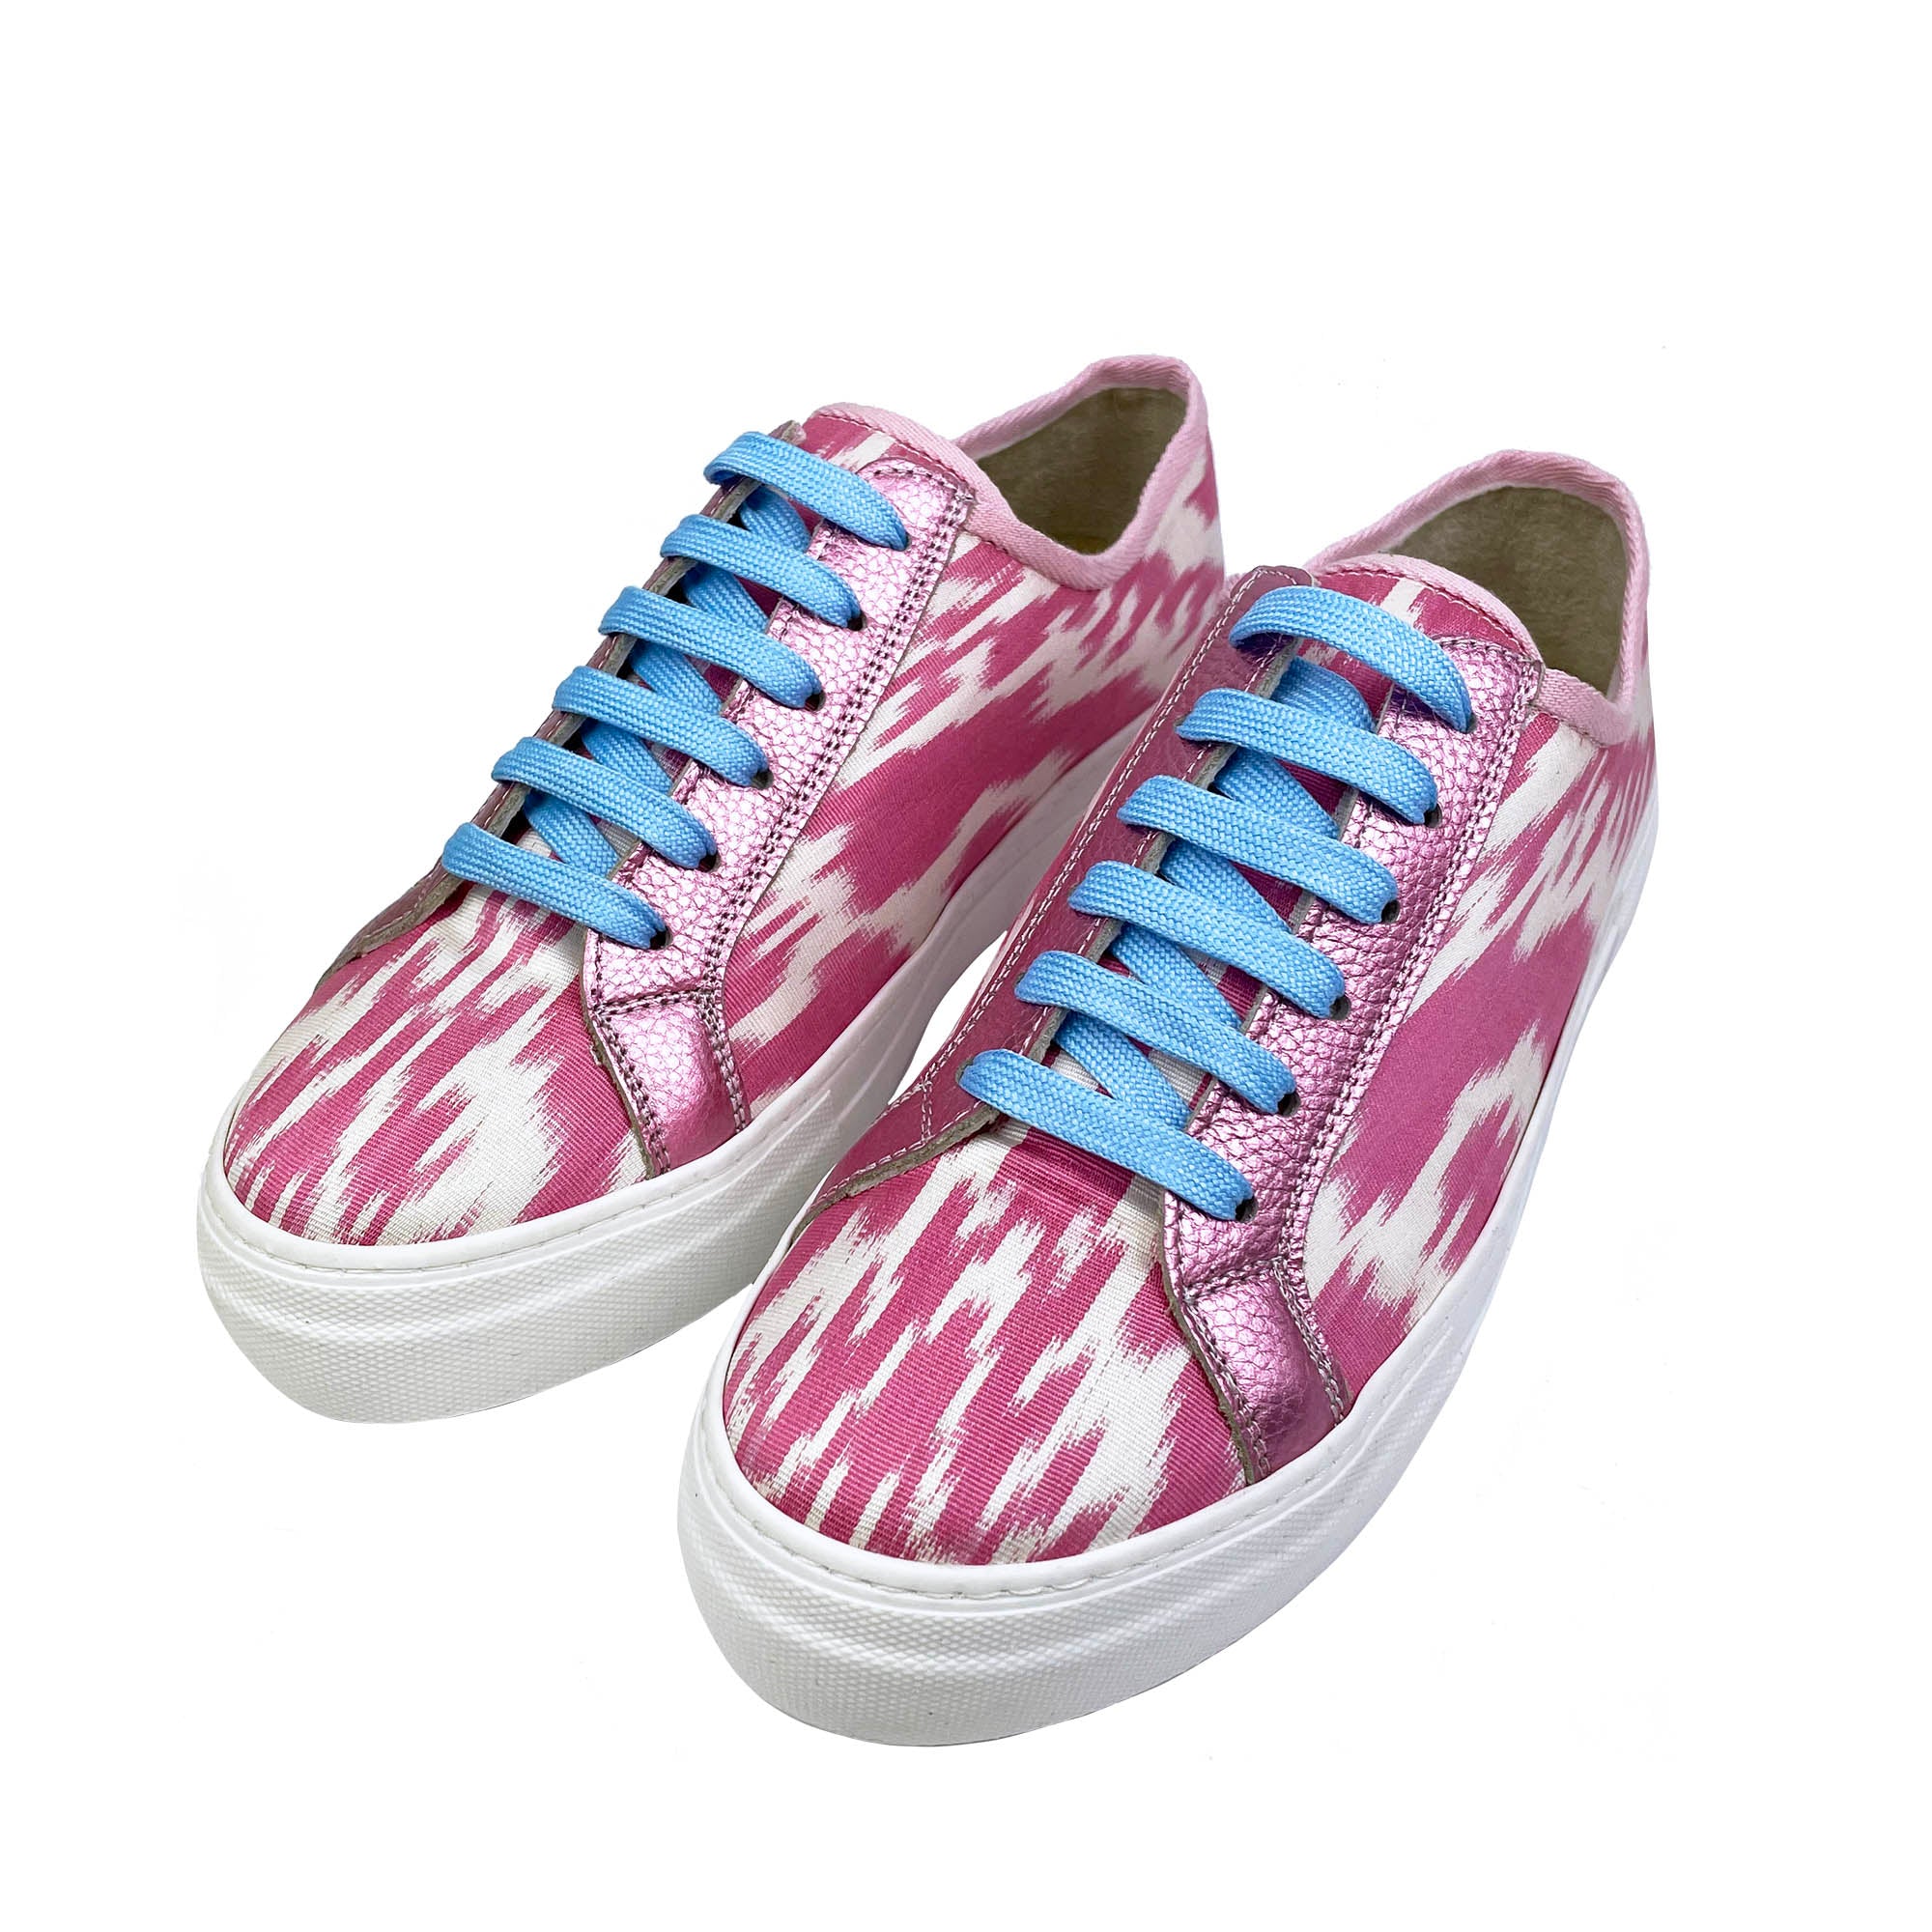 Pink Ikat Silk Sneakers with pale blue laces